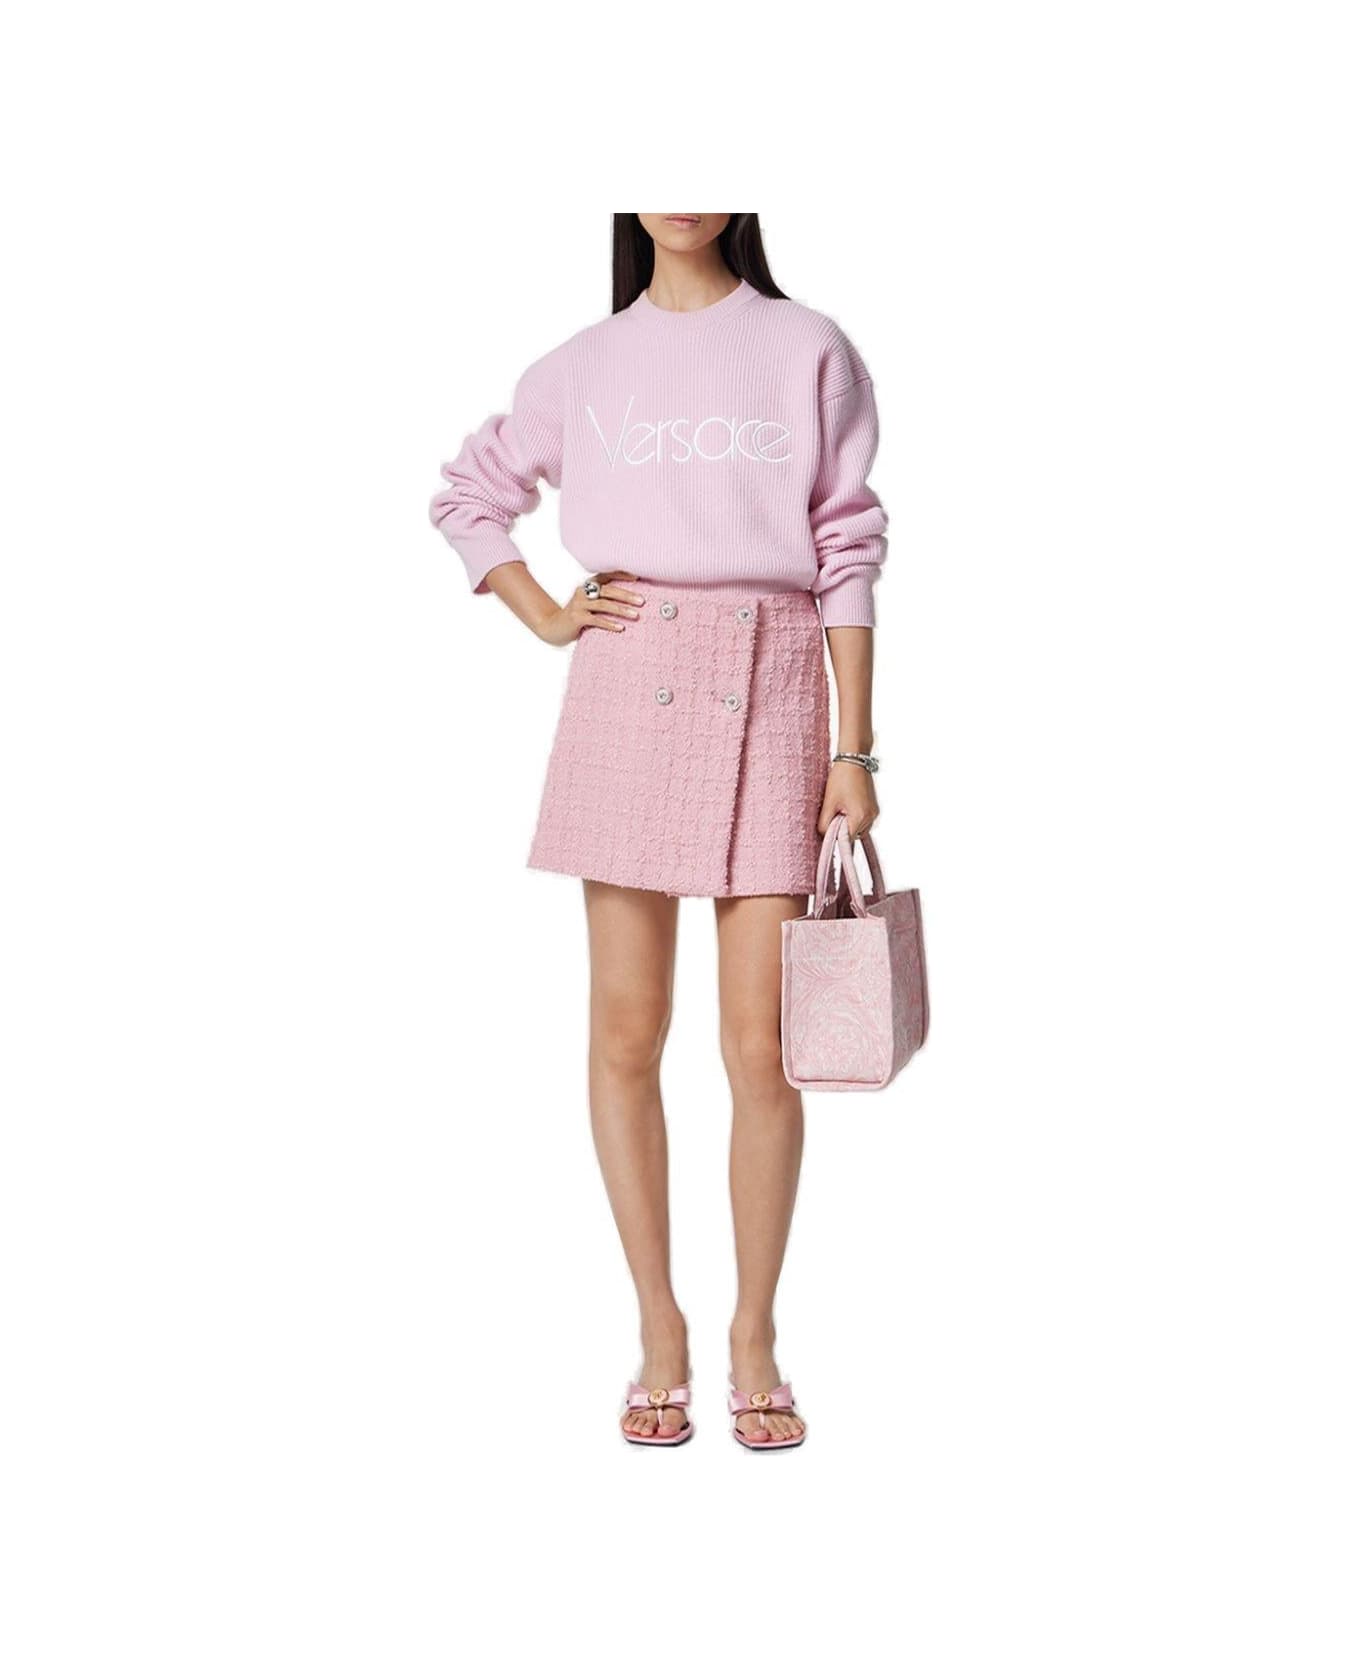 Versace Logo Embroidered Knitted Jumper - Pale Pink